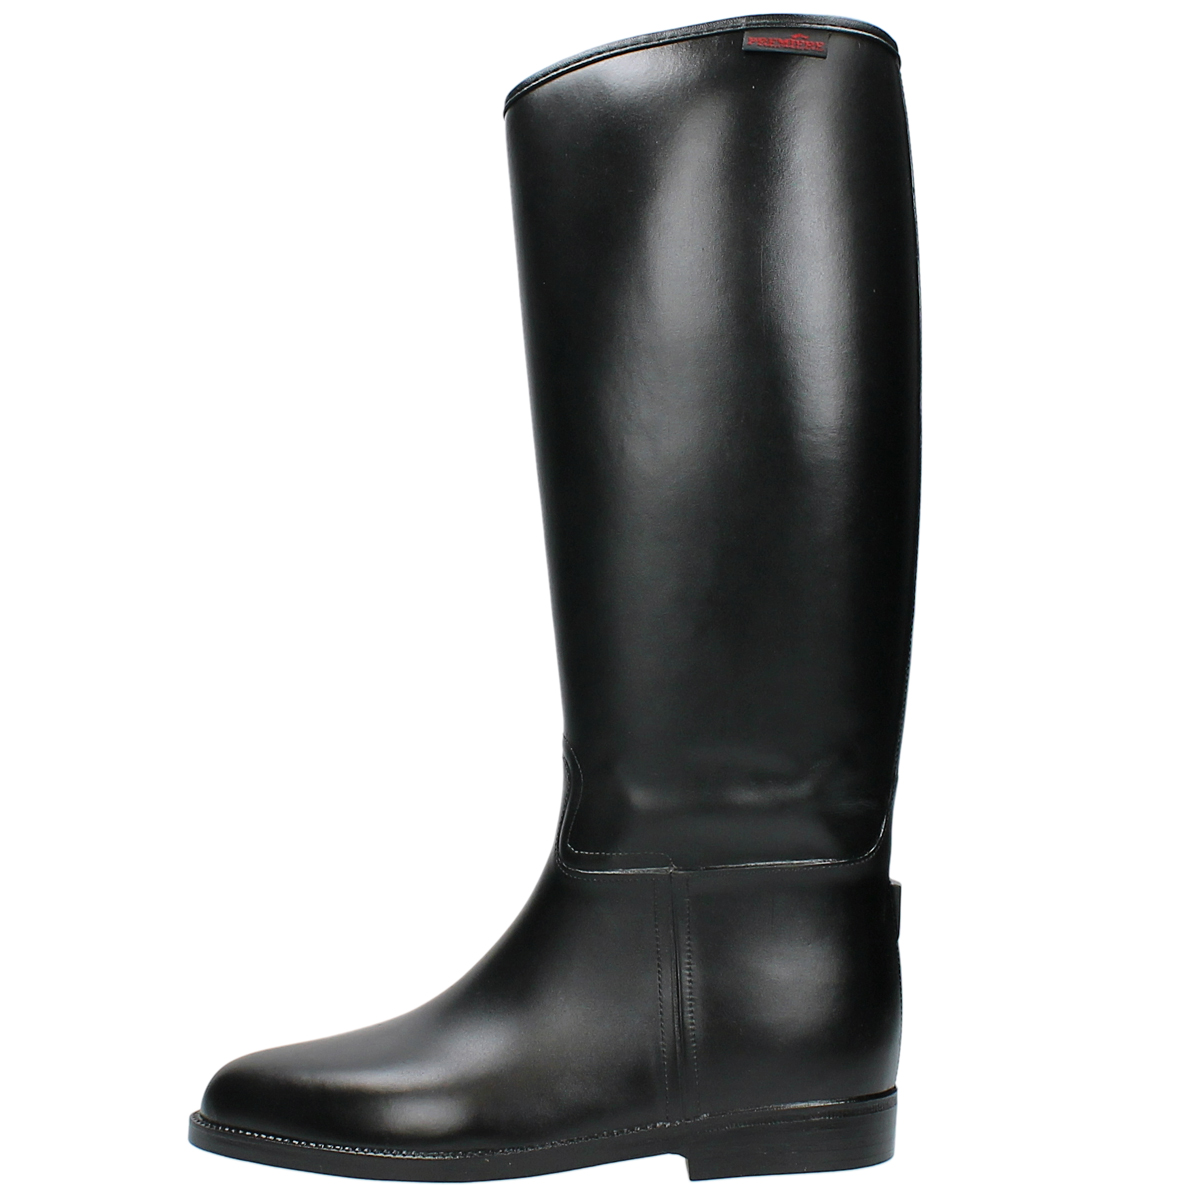 riding boots rubber